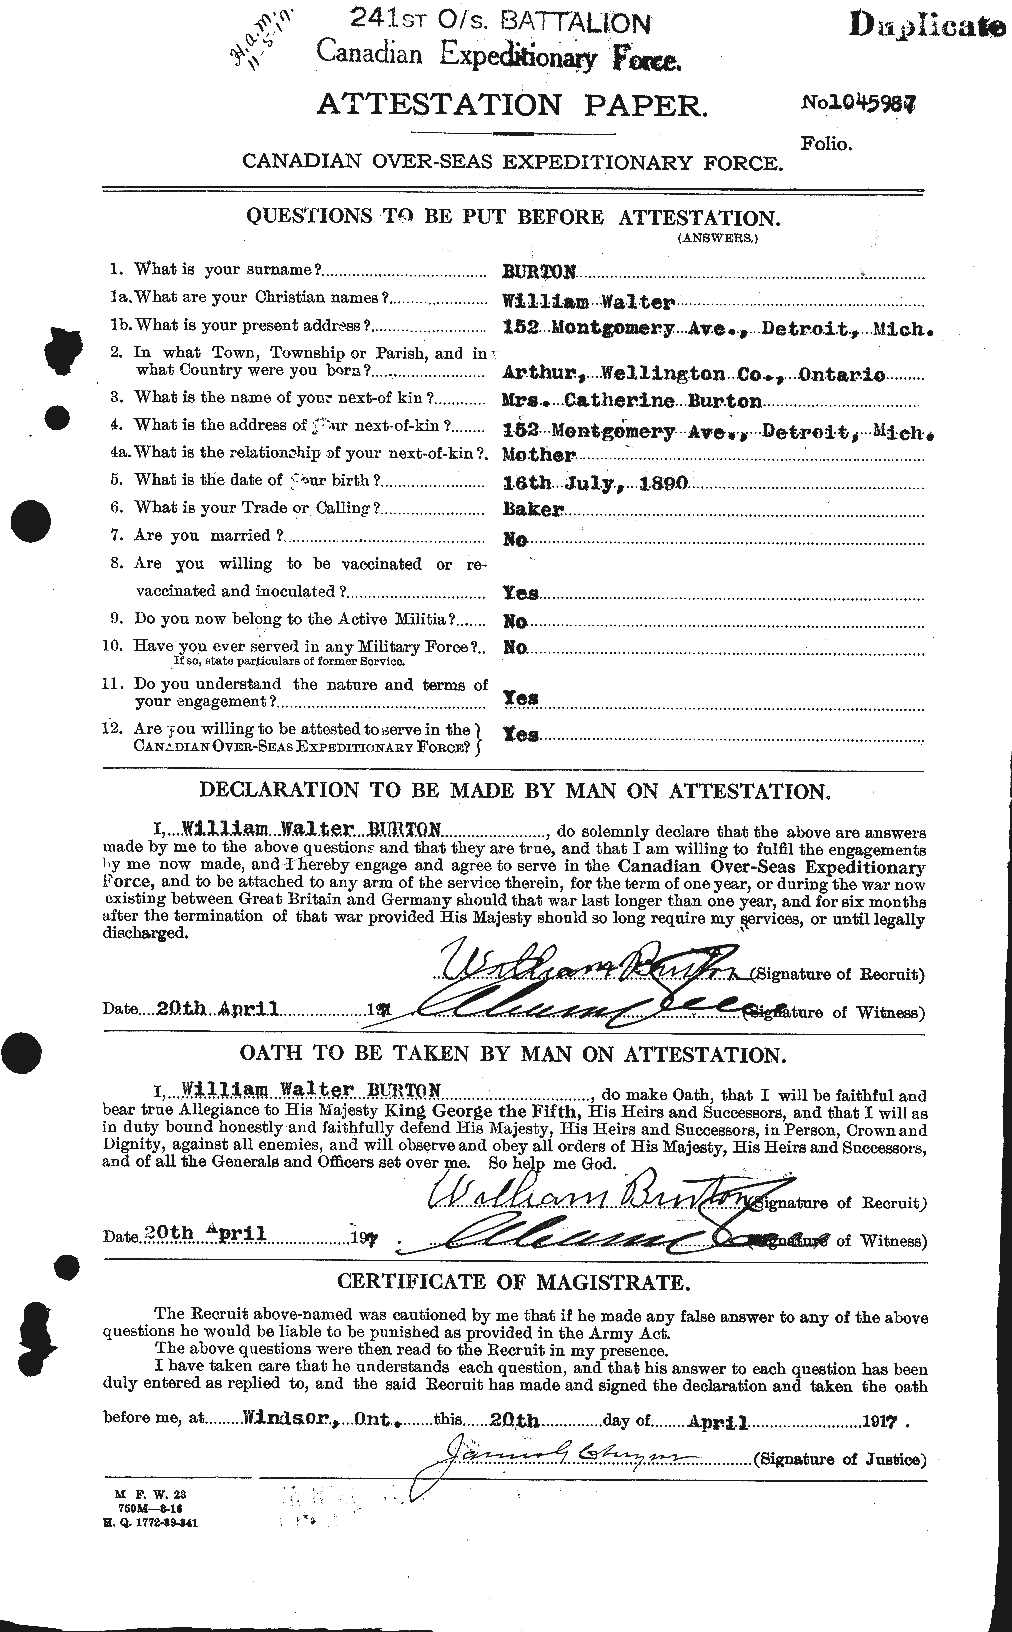 Personnel Records of the First World War - CEF 272774a